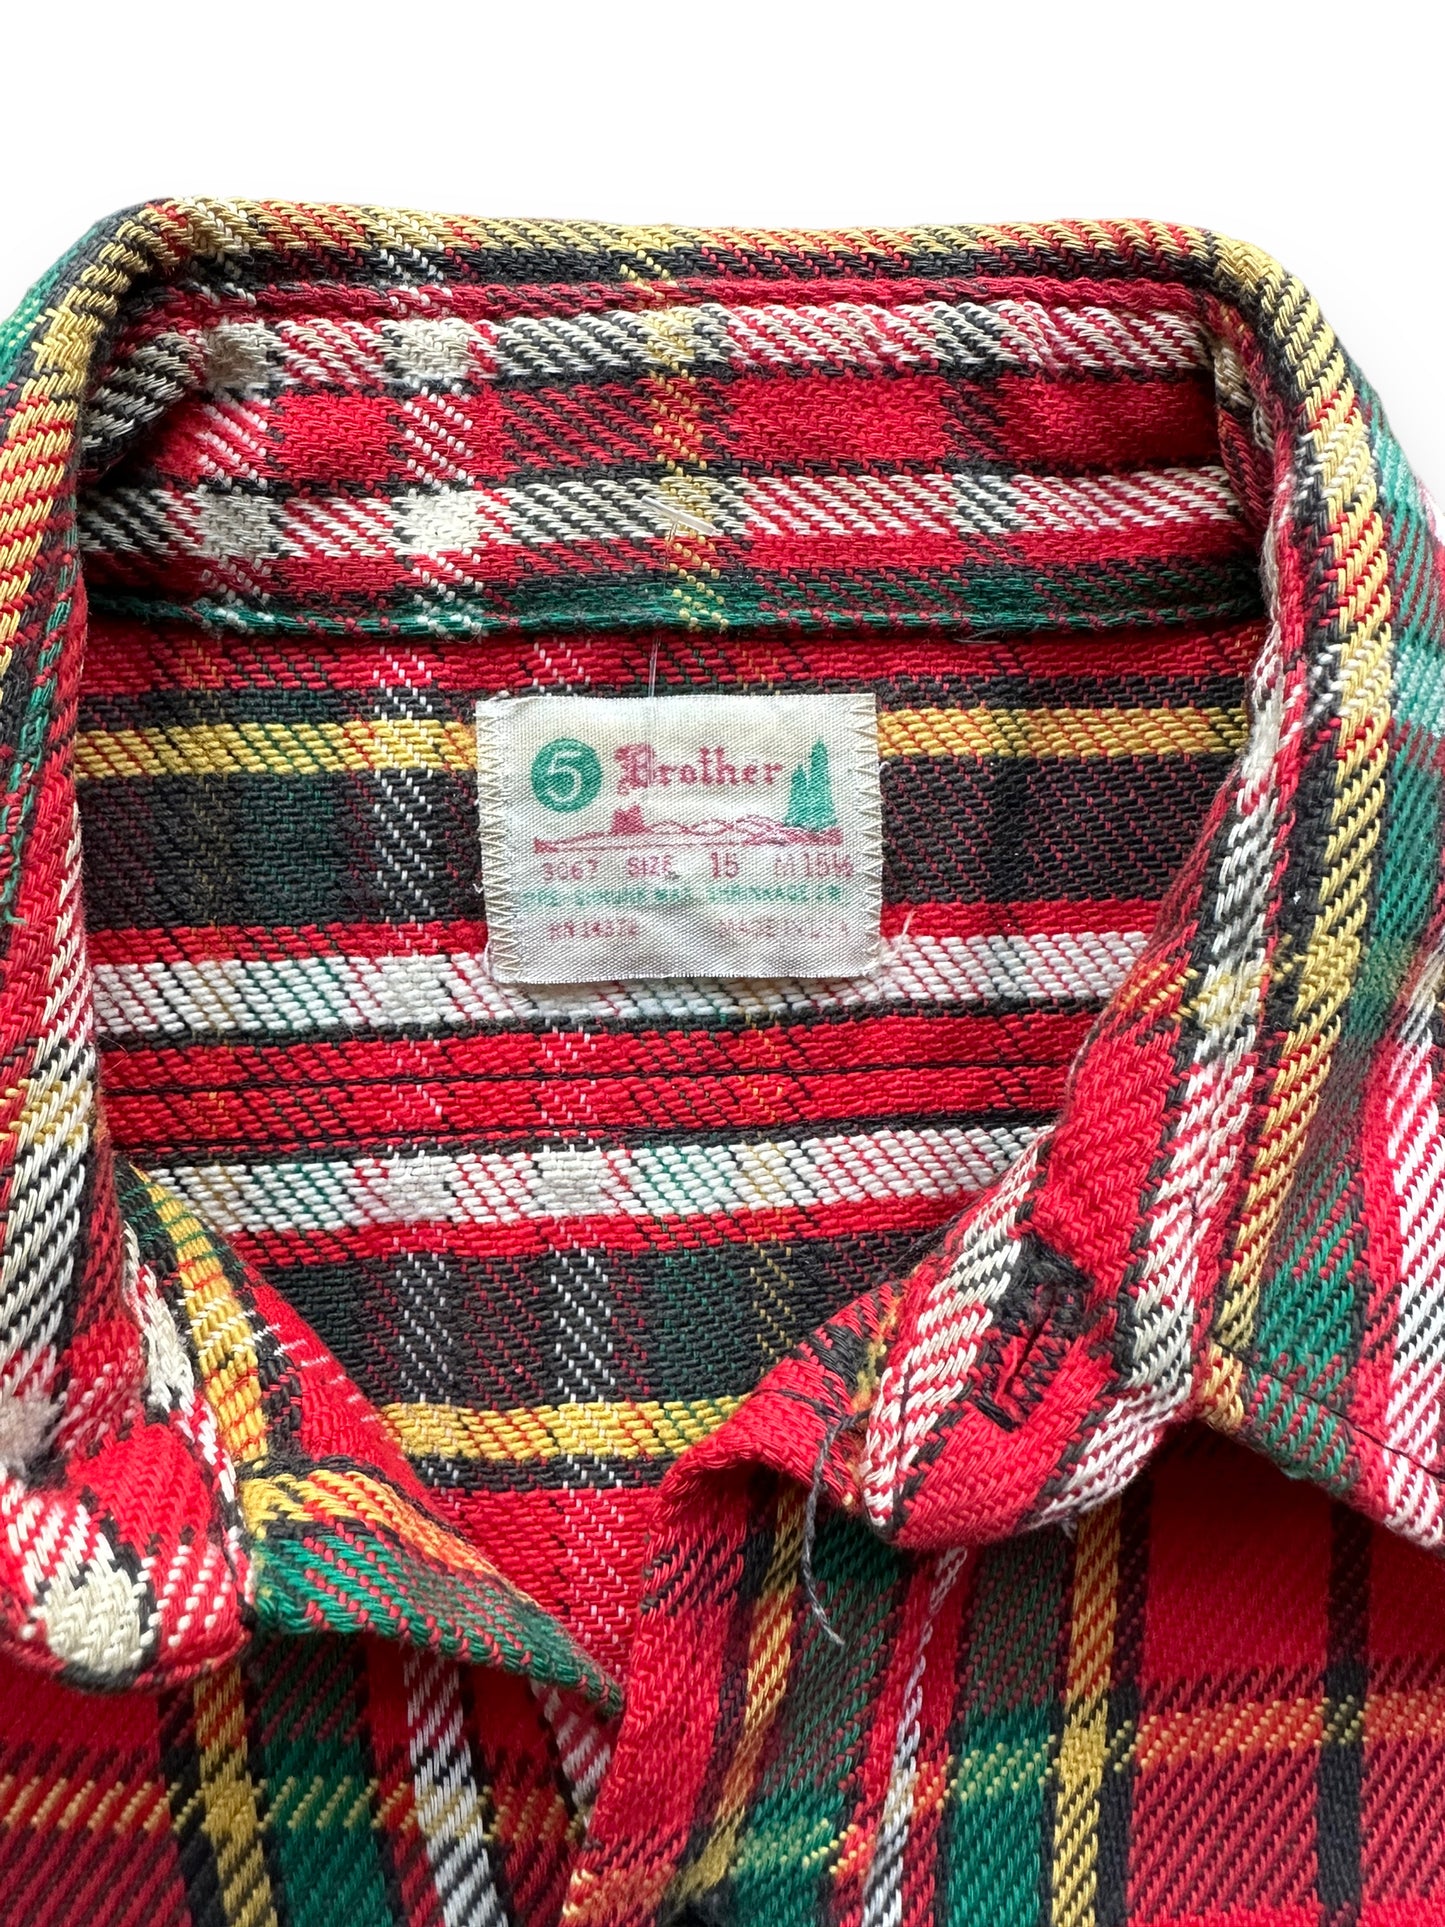 Tag View of Vintage 5 Brothers Red and Green Cotton Flannel SZ M | Vintage Cotton Flannel Seattle | Barn Owl Vintage Seattle